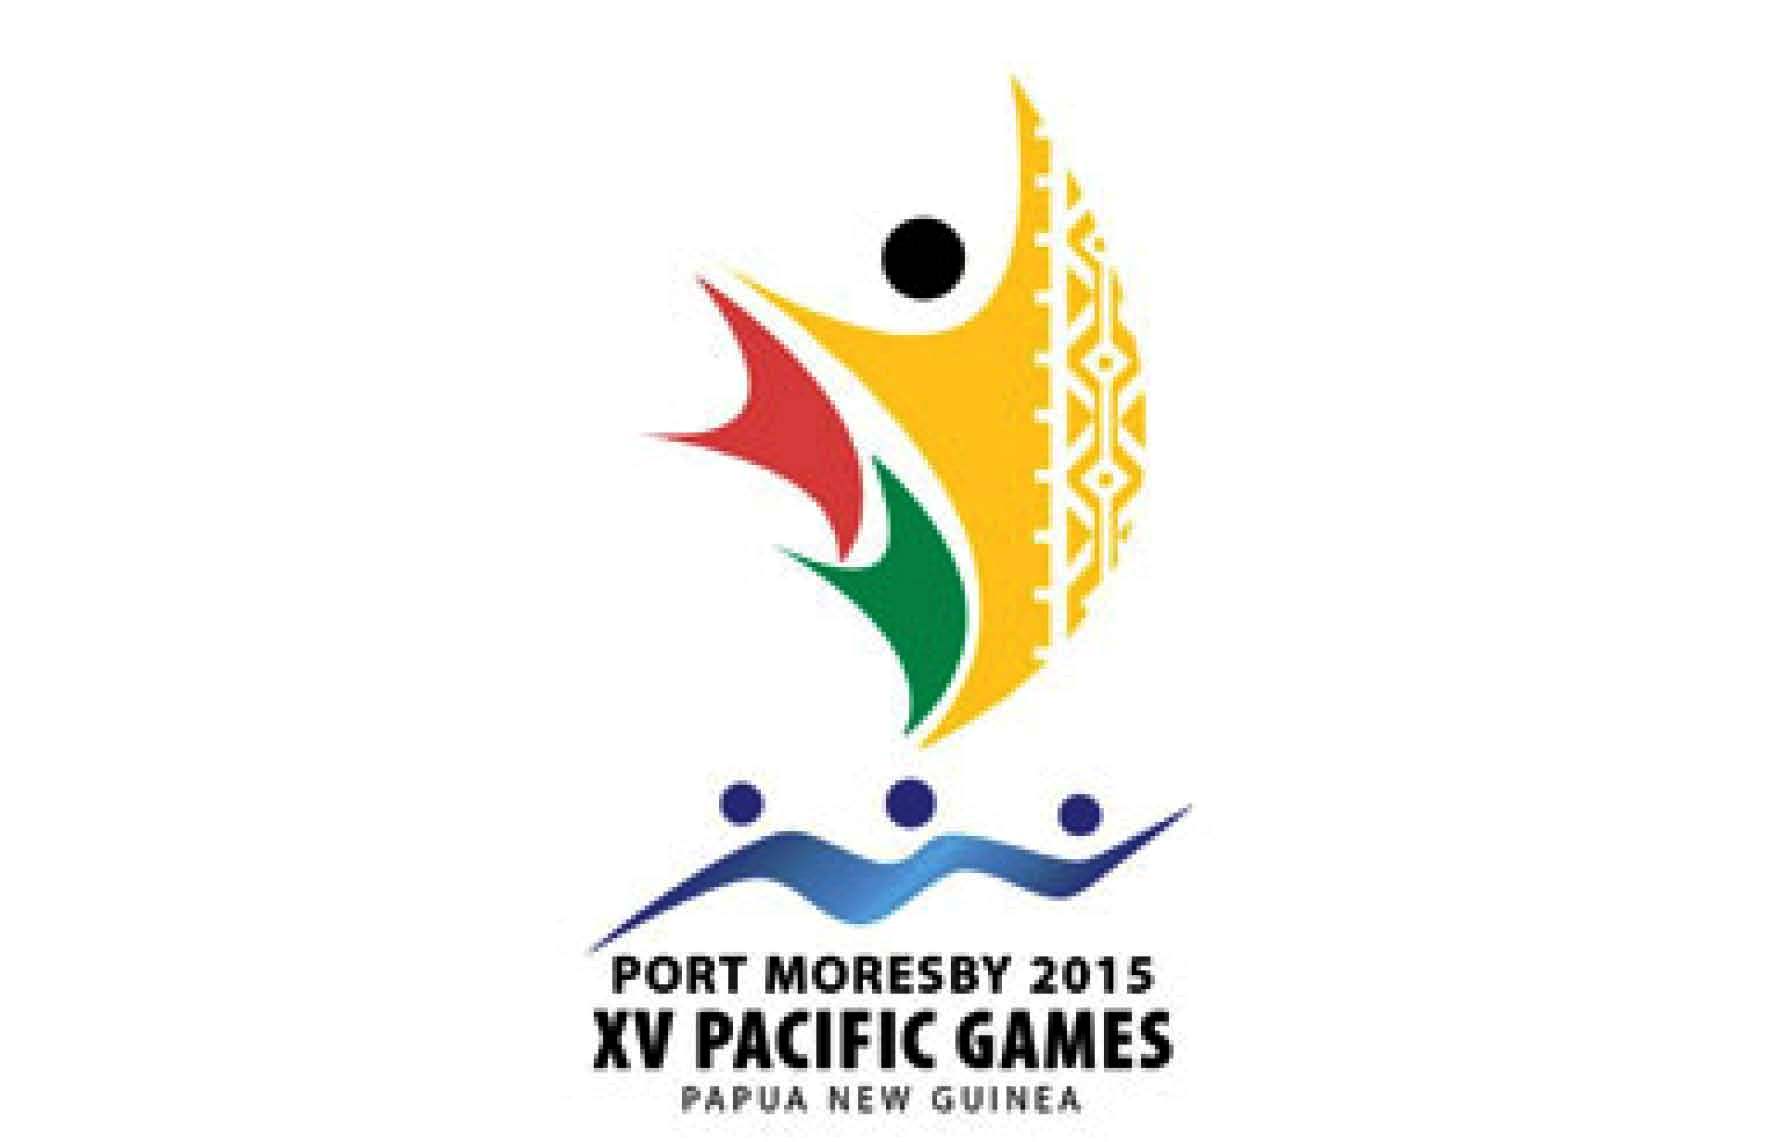 Port Moresby 2015 will be a major opportunity for Australia and New Zealand to fully integrate themselves into the Pacific Games ©Port Moresby 2015